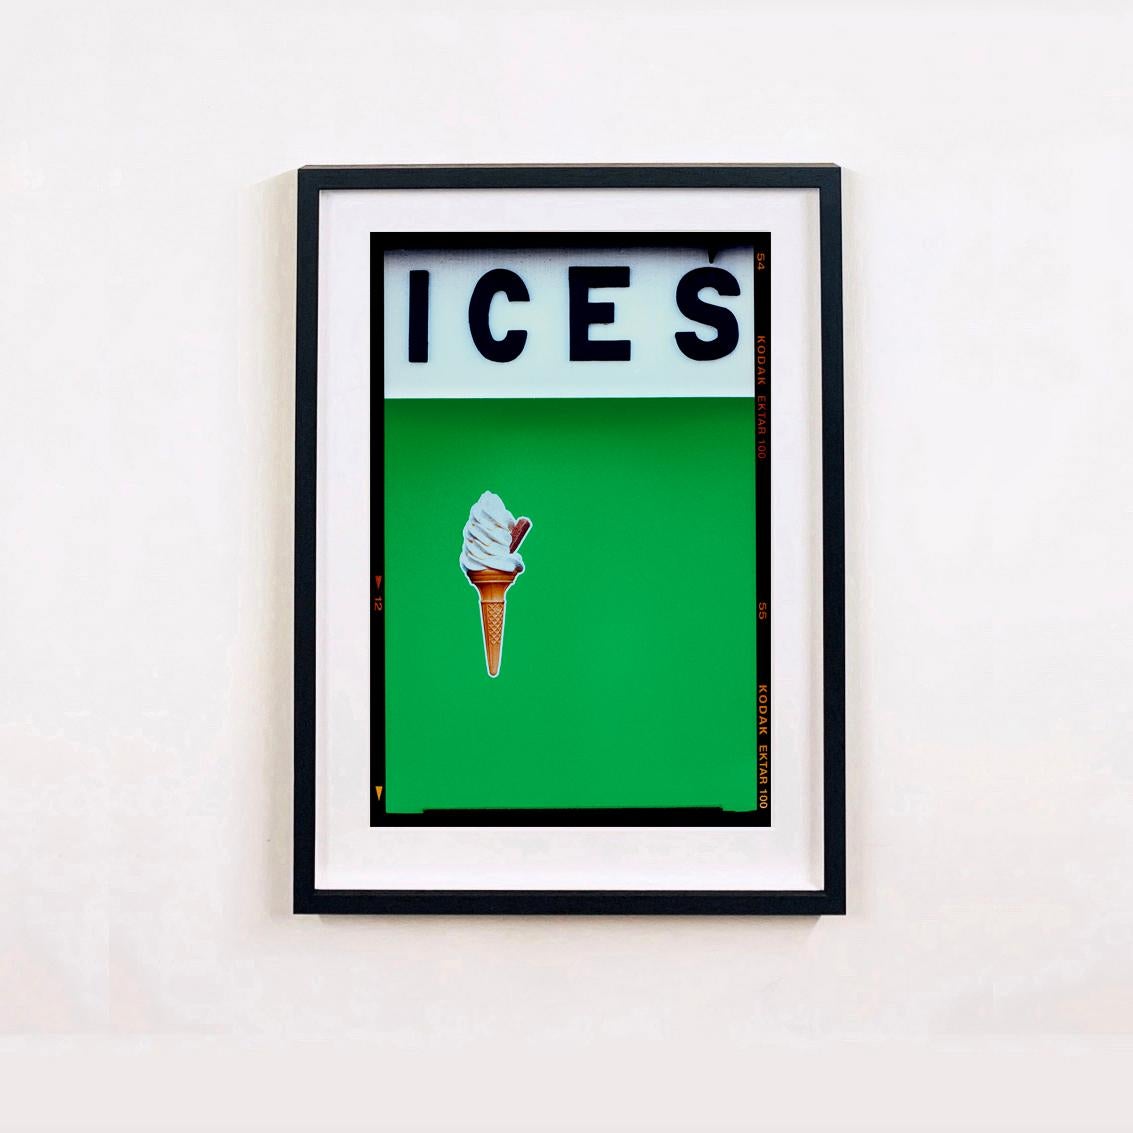 ICES - Four Framed Artworks, Photographs by Richard Heeps. 
Featured here Lilac, Sherbet Yellow, Green, Melondrama. Get in touch to request other sizes or color combinations.

Each artwork measures 21.25